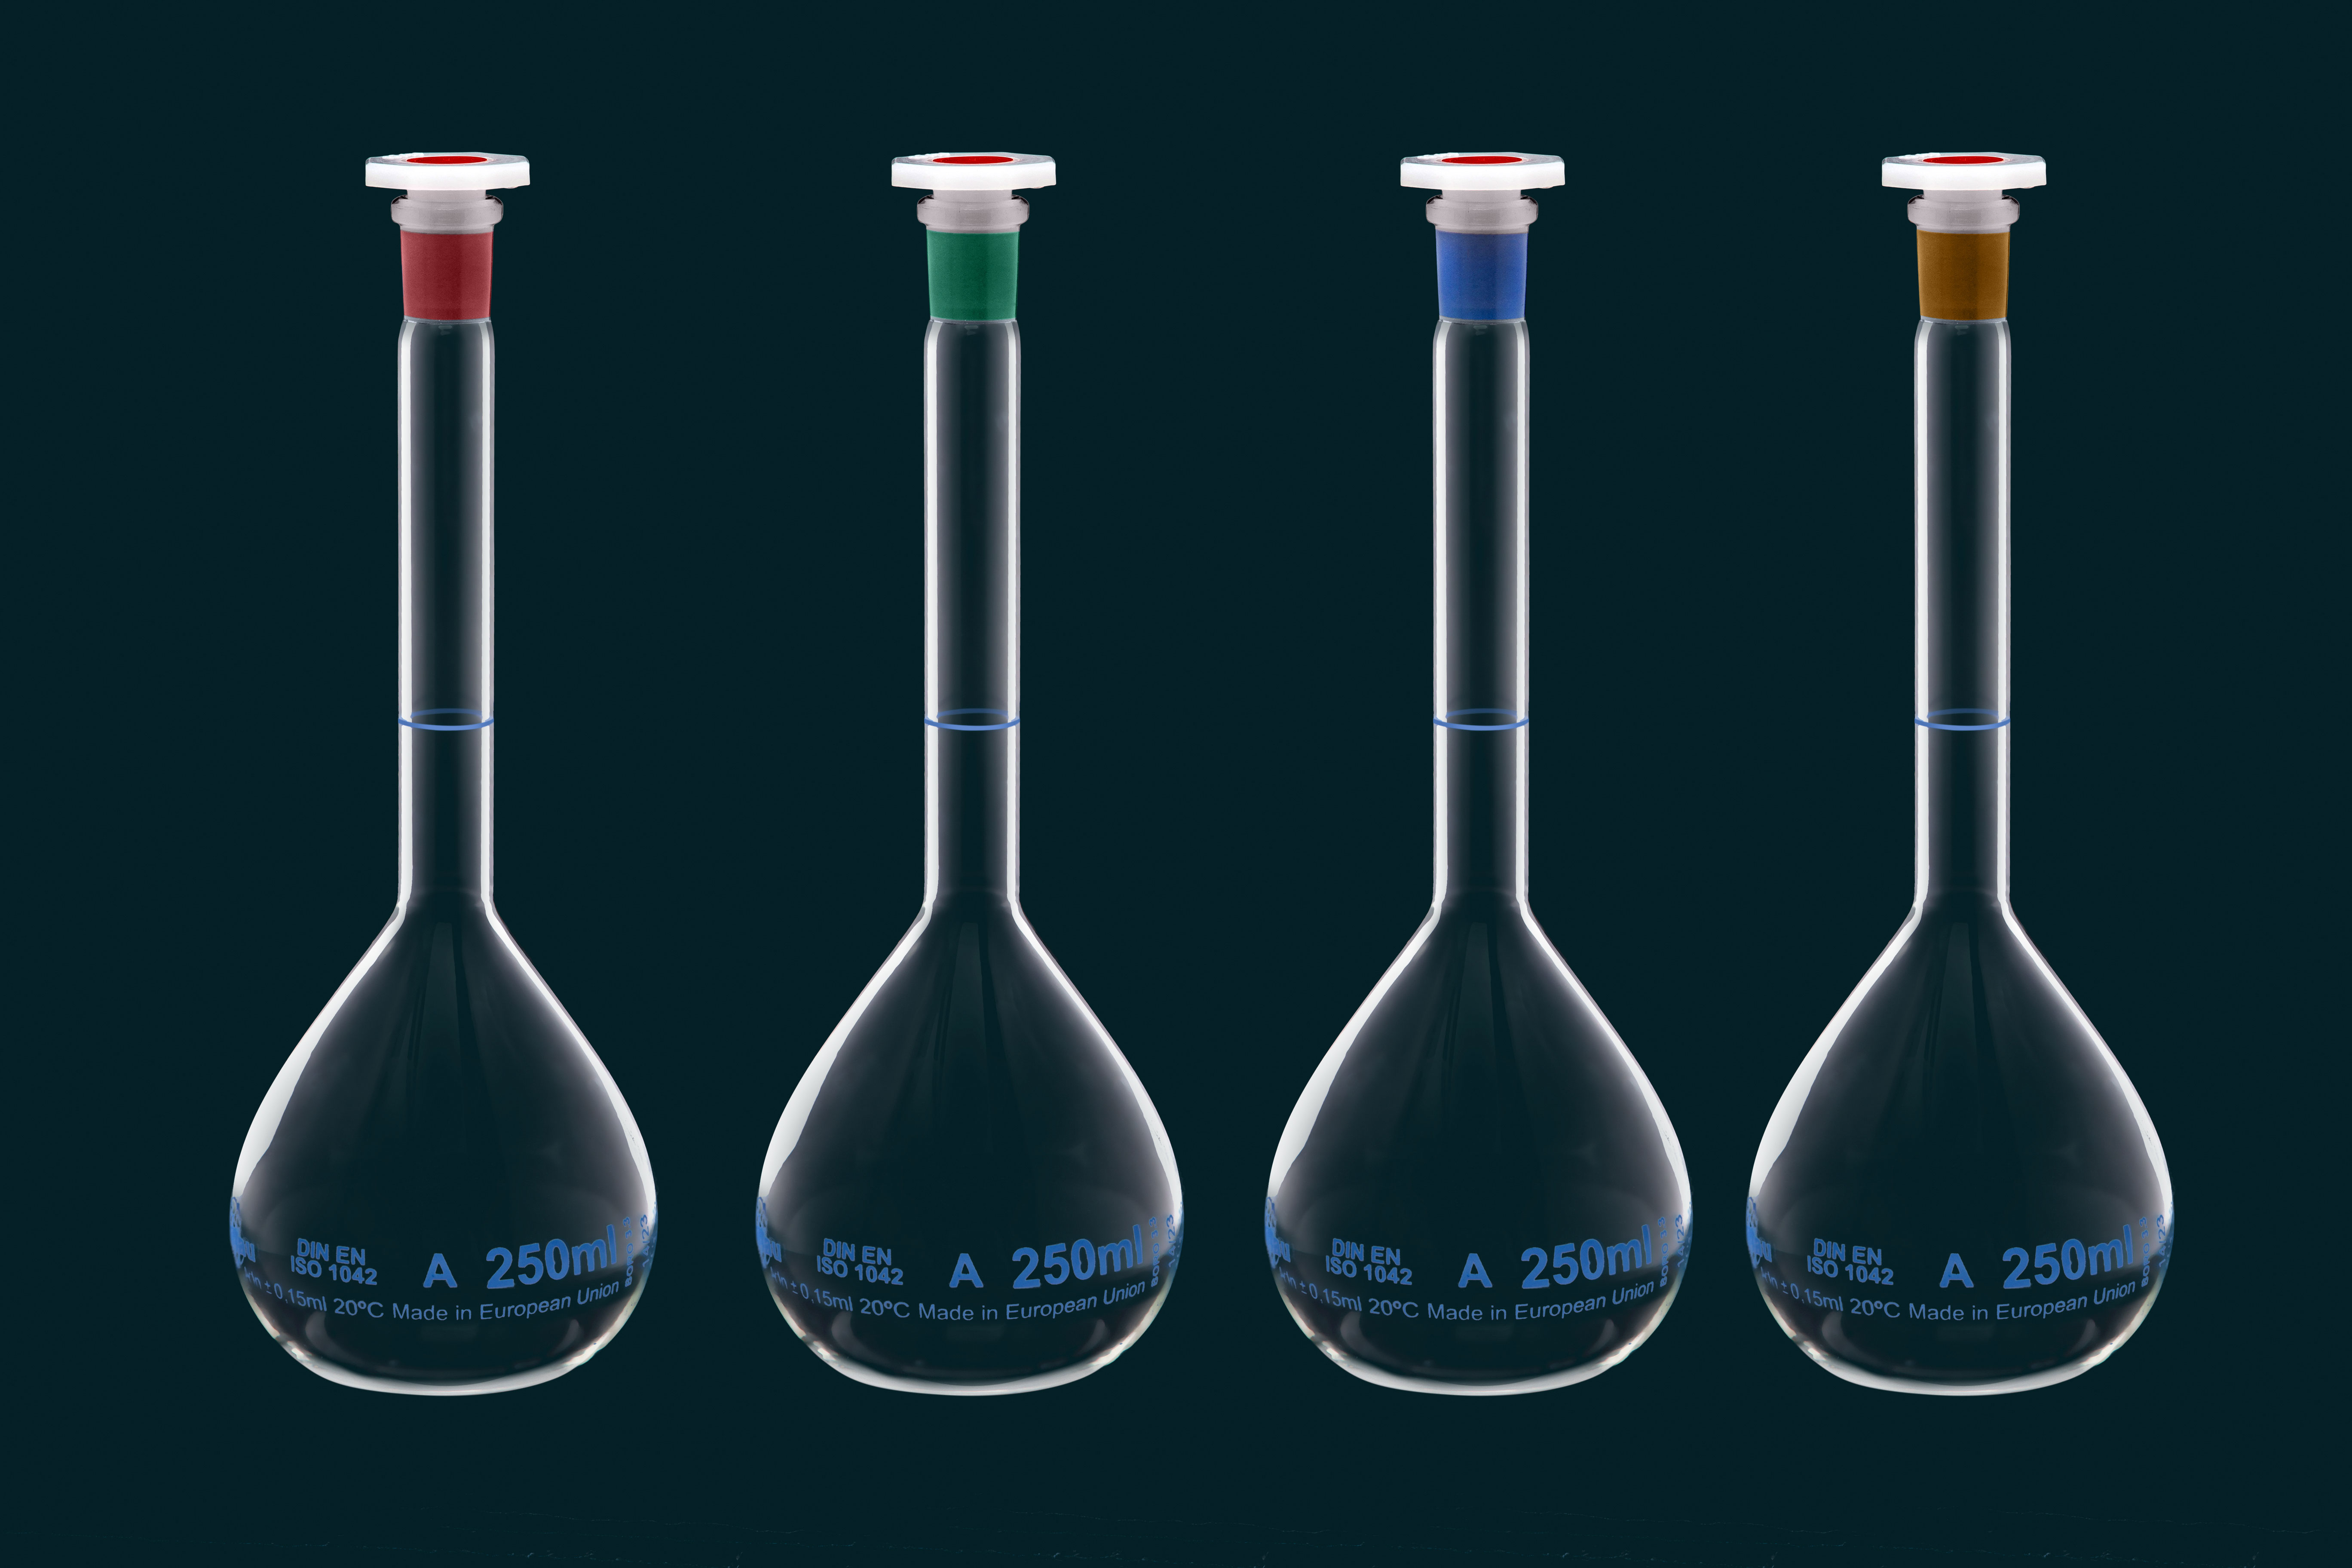 Volumetric flask with red neck, Class A, 20 ml, with PE stopper, lot number and certificate of conformity